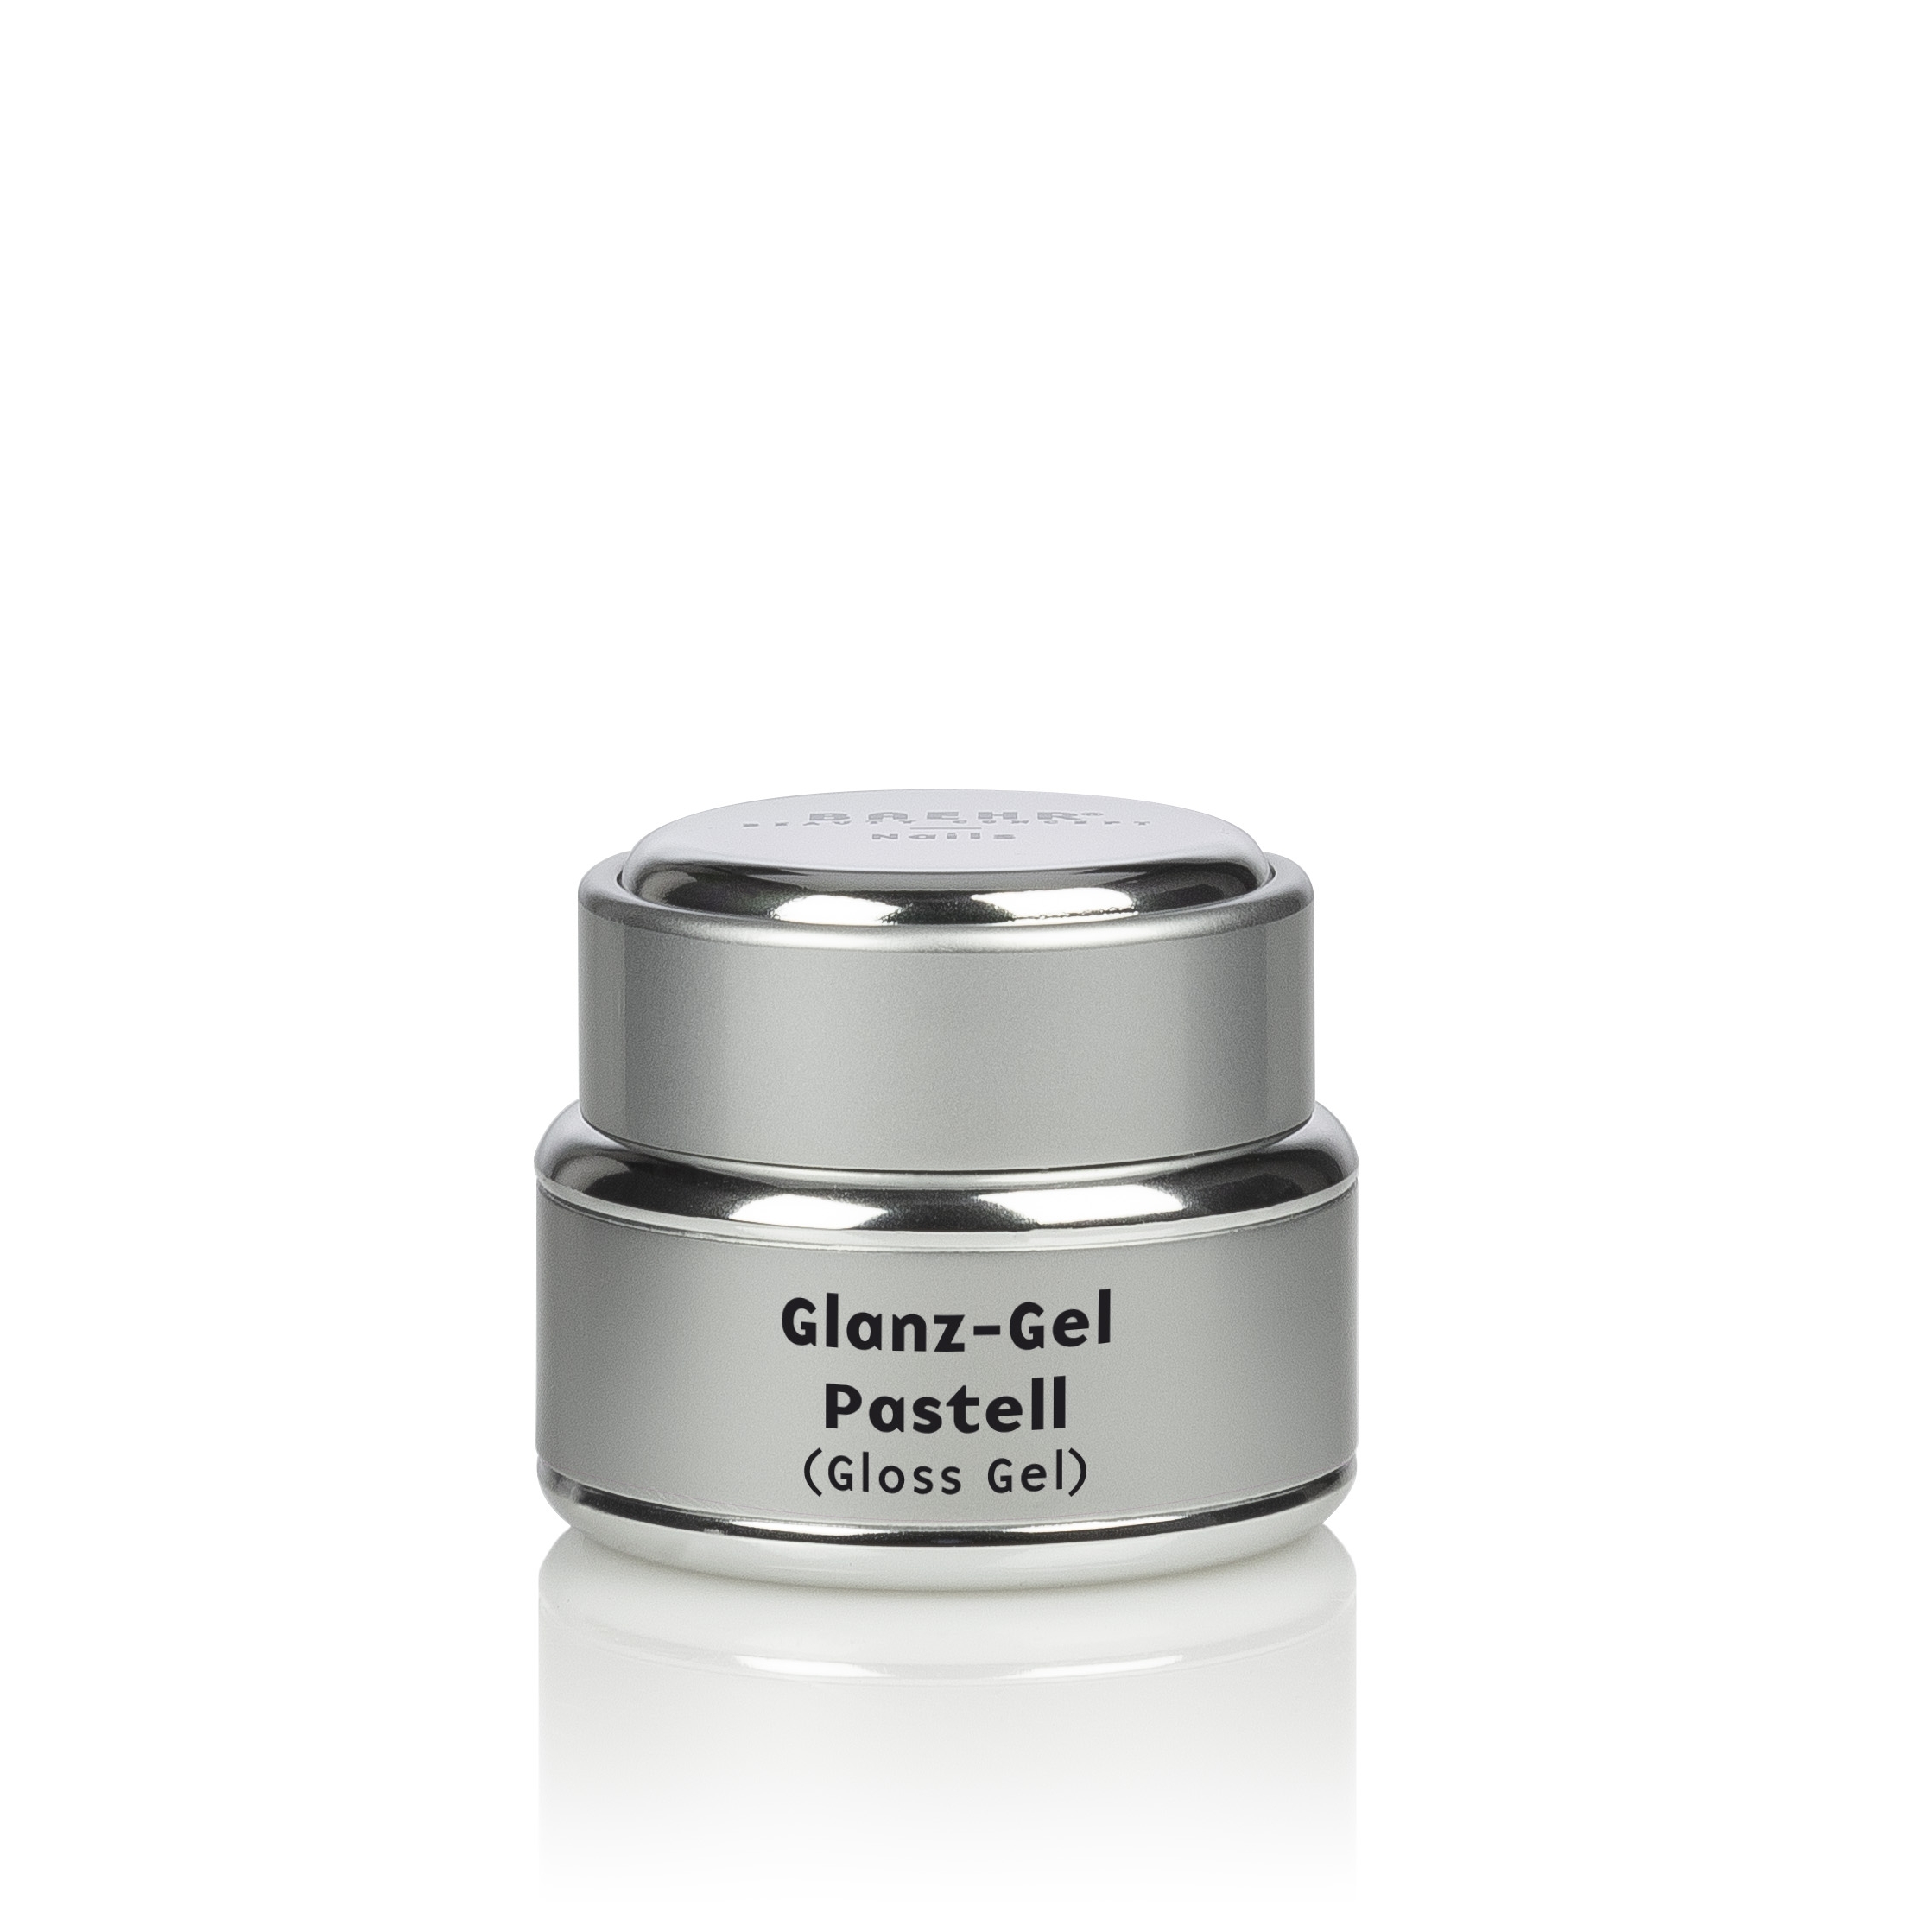 BAEHR BEAUTY CONCEPT - NAILS Glanz-Gel Pastell 15 ml